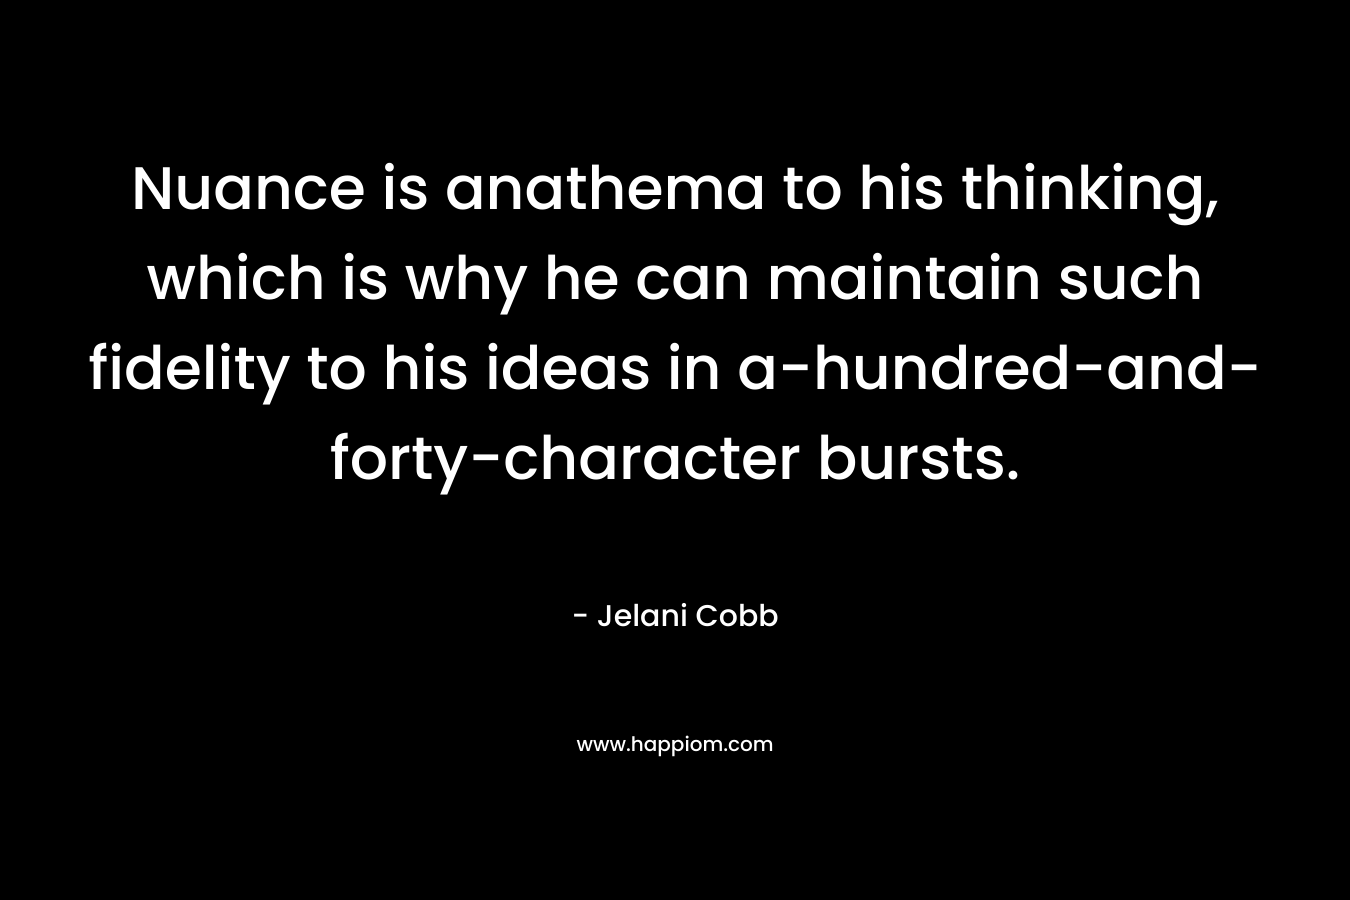 Nuance is anathema to his thinking, which is why he can maintain such fidelity to his ideas in a-hundred-and-forty-character bursts. – Jelani Cobb